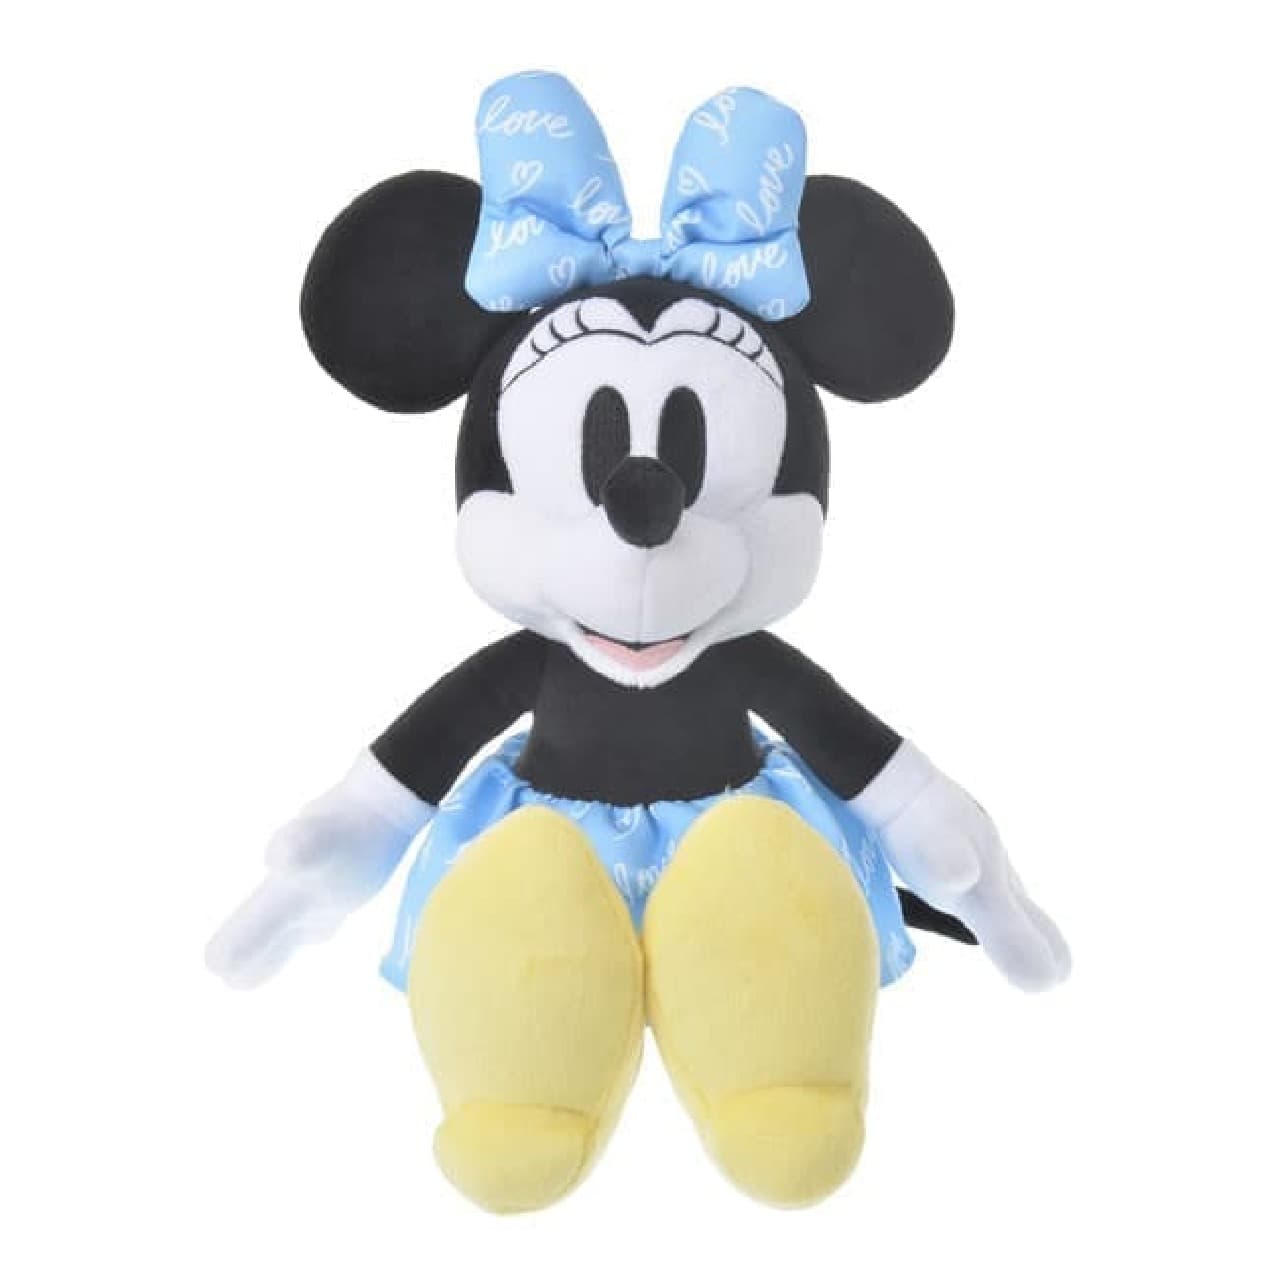 March 2nd "Minnie Day" commemoration! Minnie Mouse New Collection at Disney Store